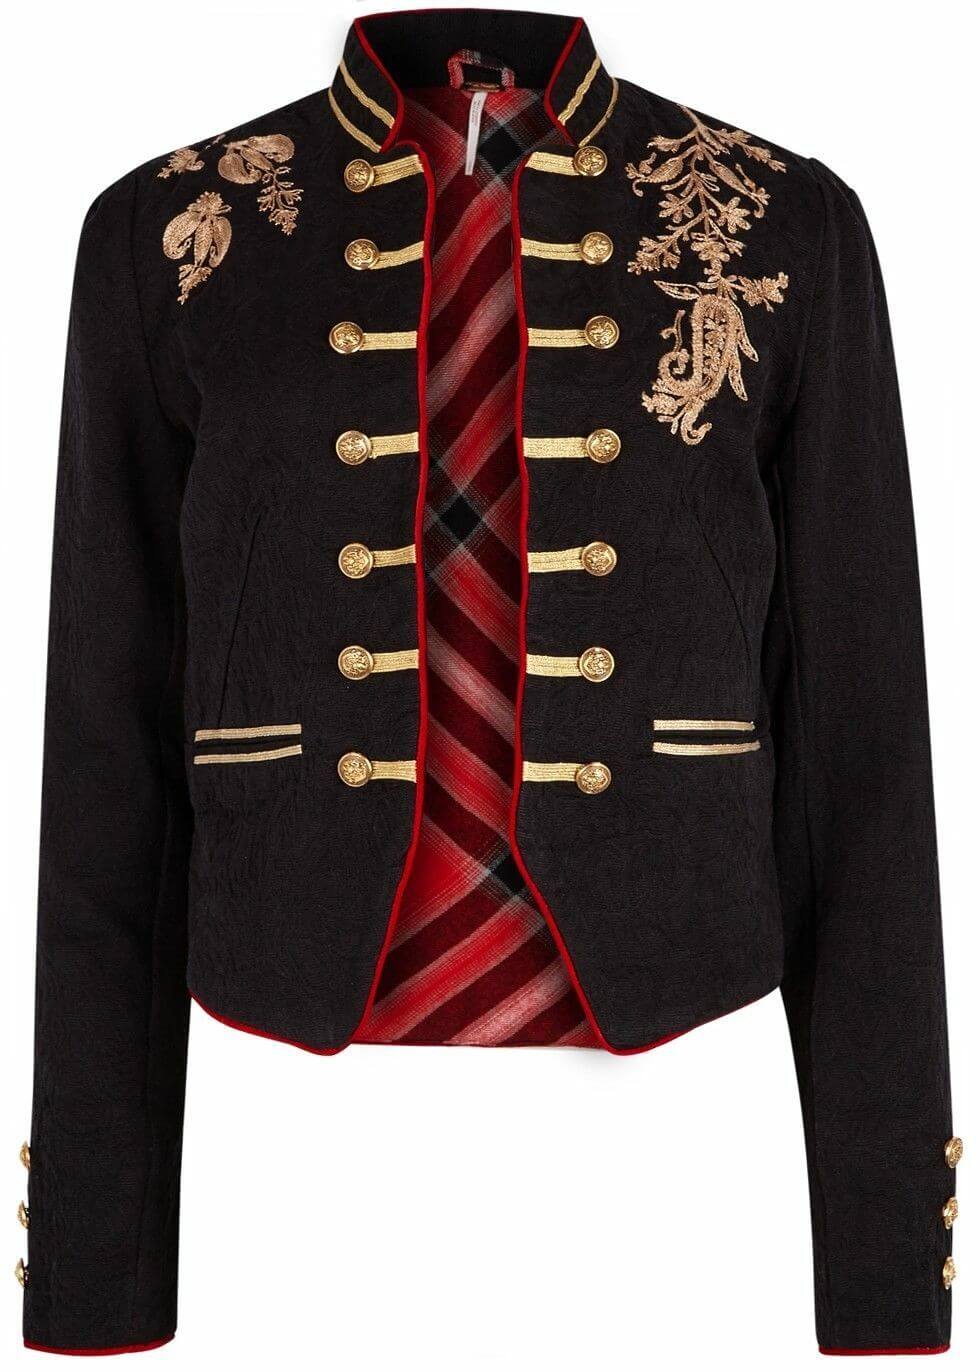 Lauren Band Jacket Military Embroidered Gold Open Front